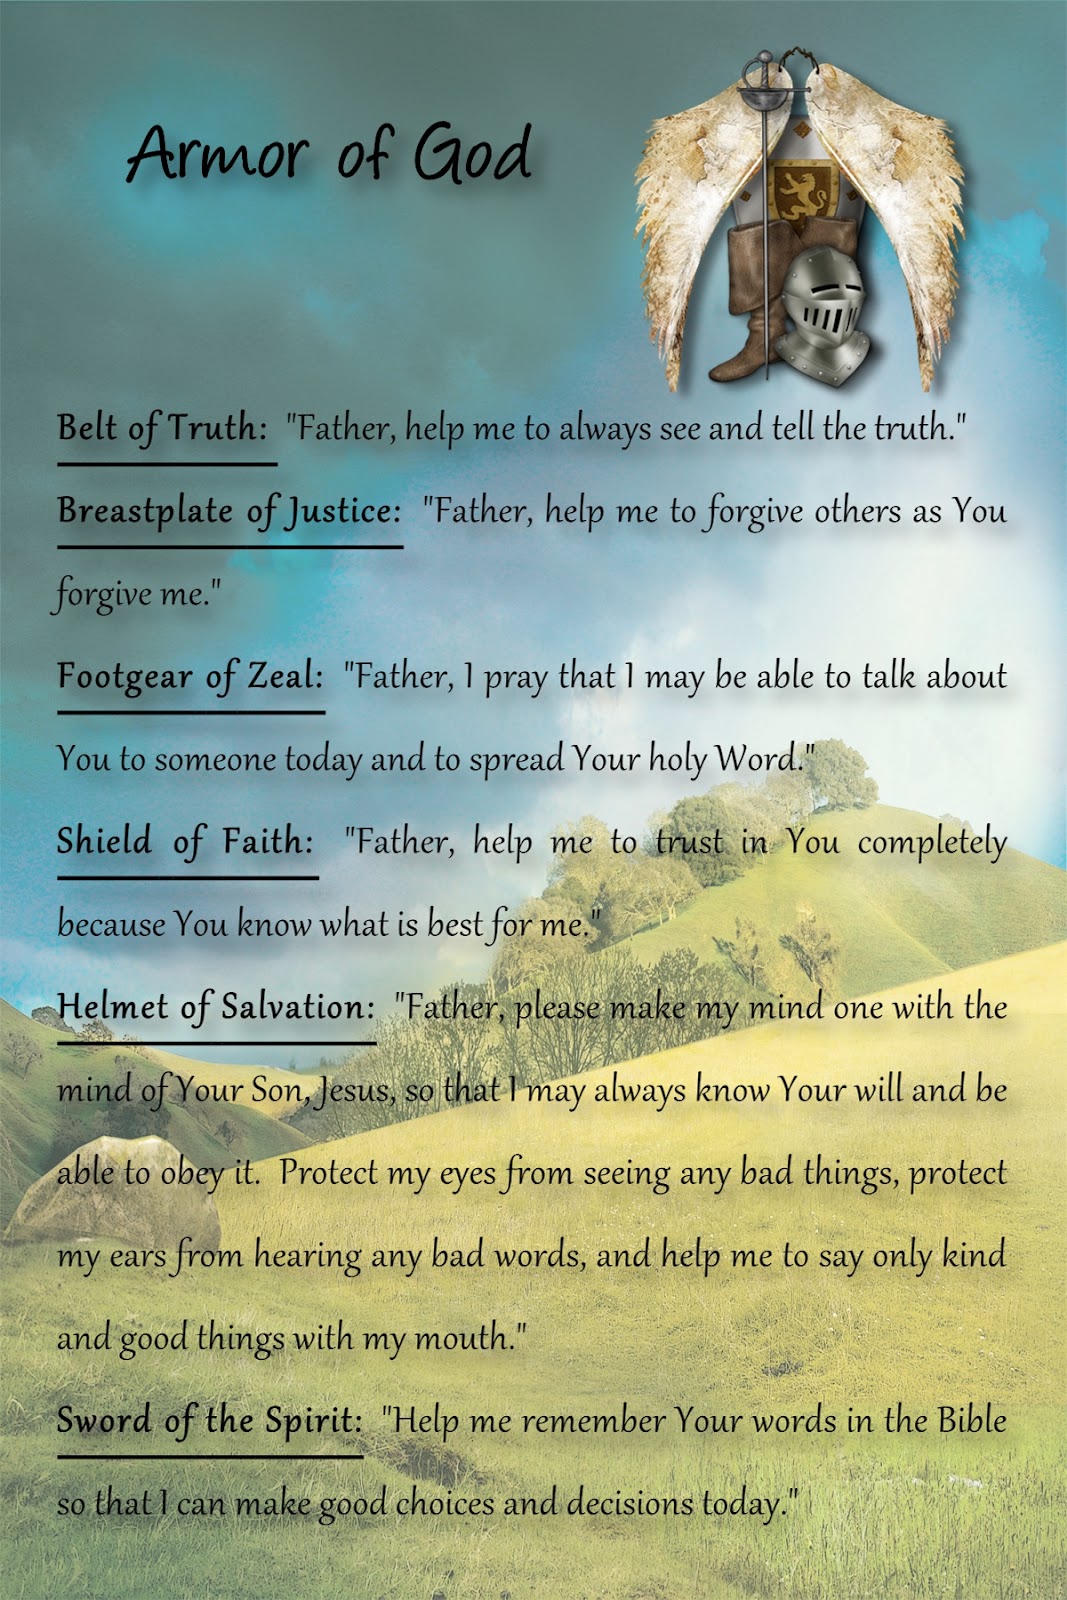 Messages for the Soul: The Armor of God